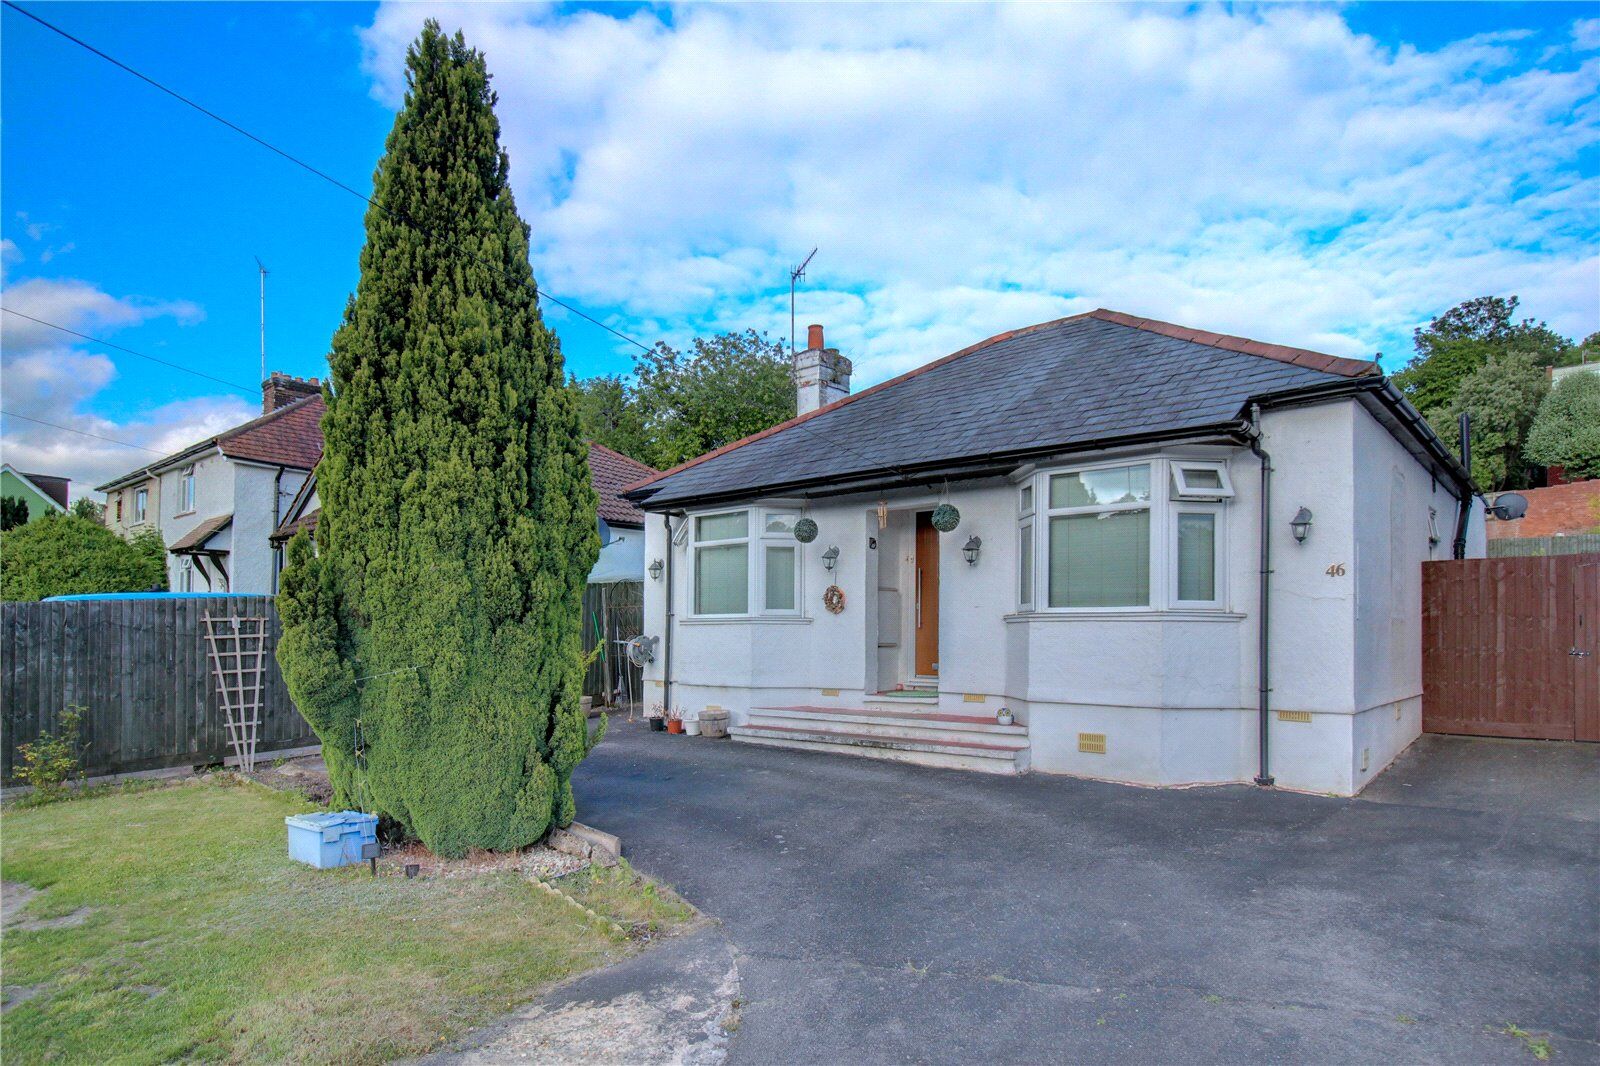 3 bedroom detached bungalow for sale Micklefield Road, High Wycombe, HP13, main image